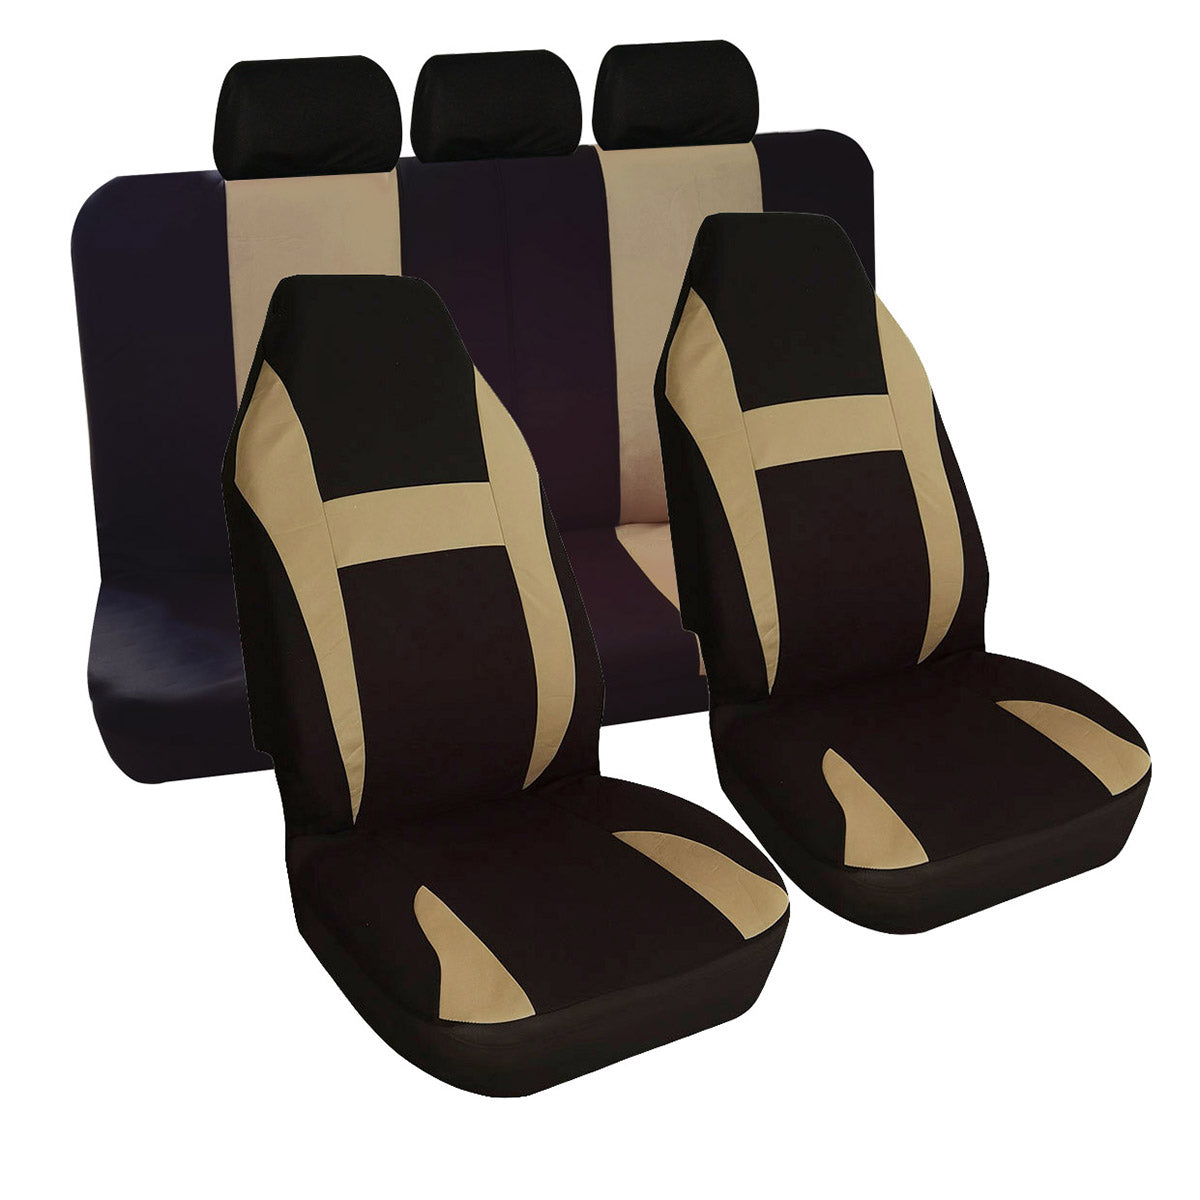 Black 7PCS Universal Front Seat Covers Set Fit For Auto Car SUV Trucks